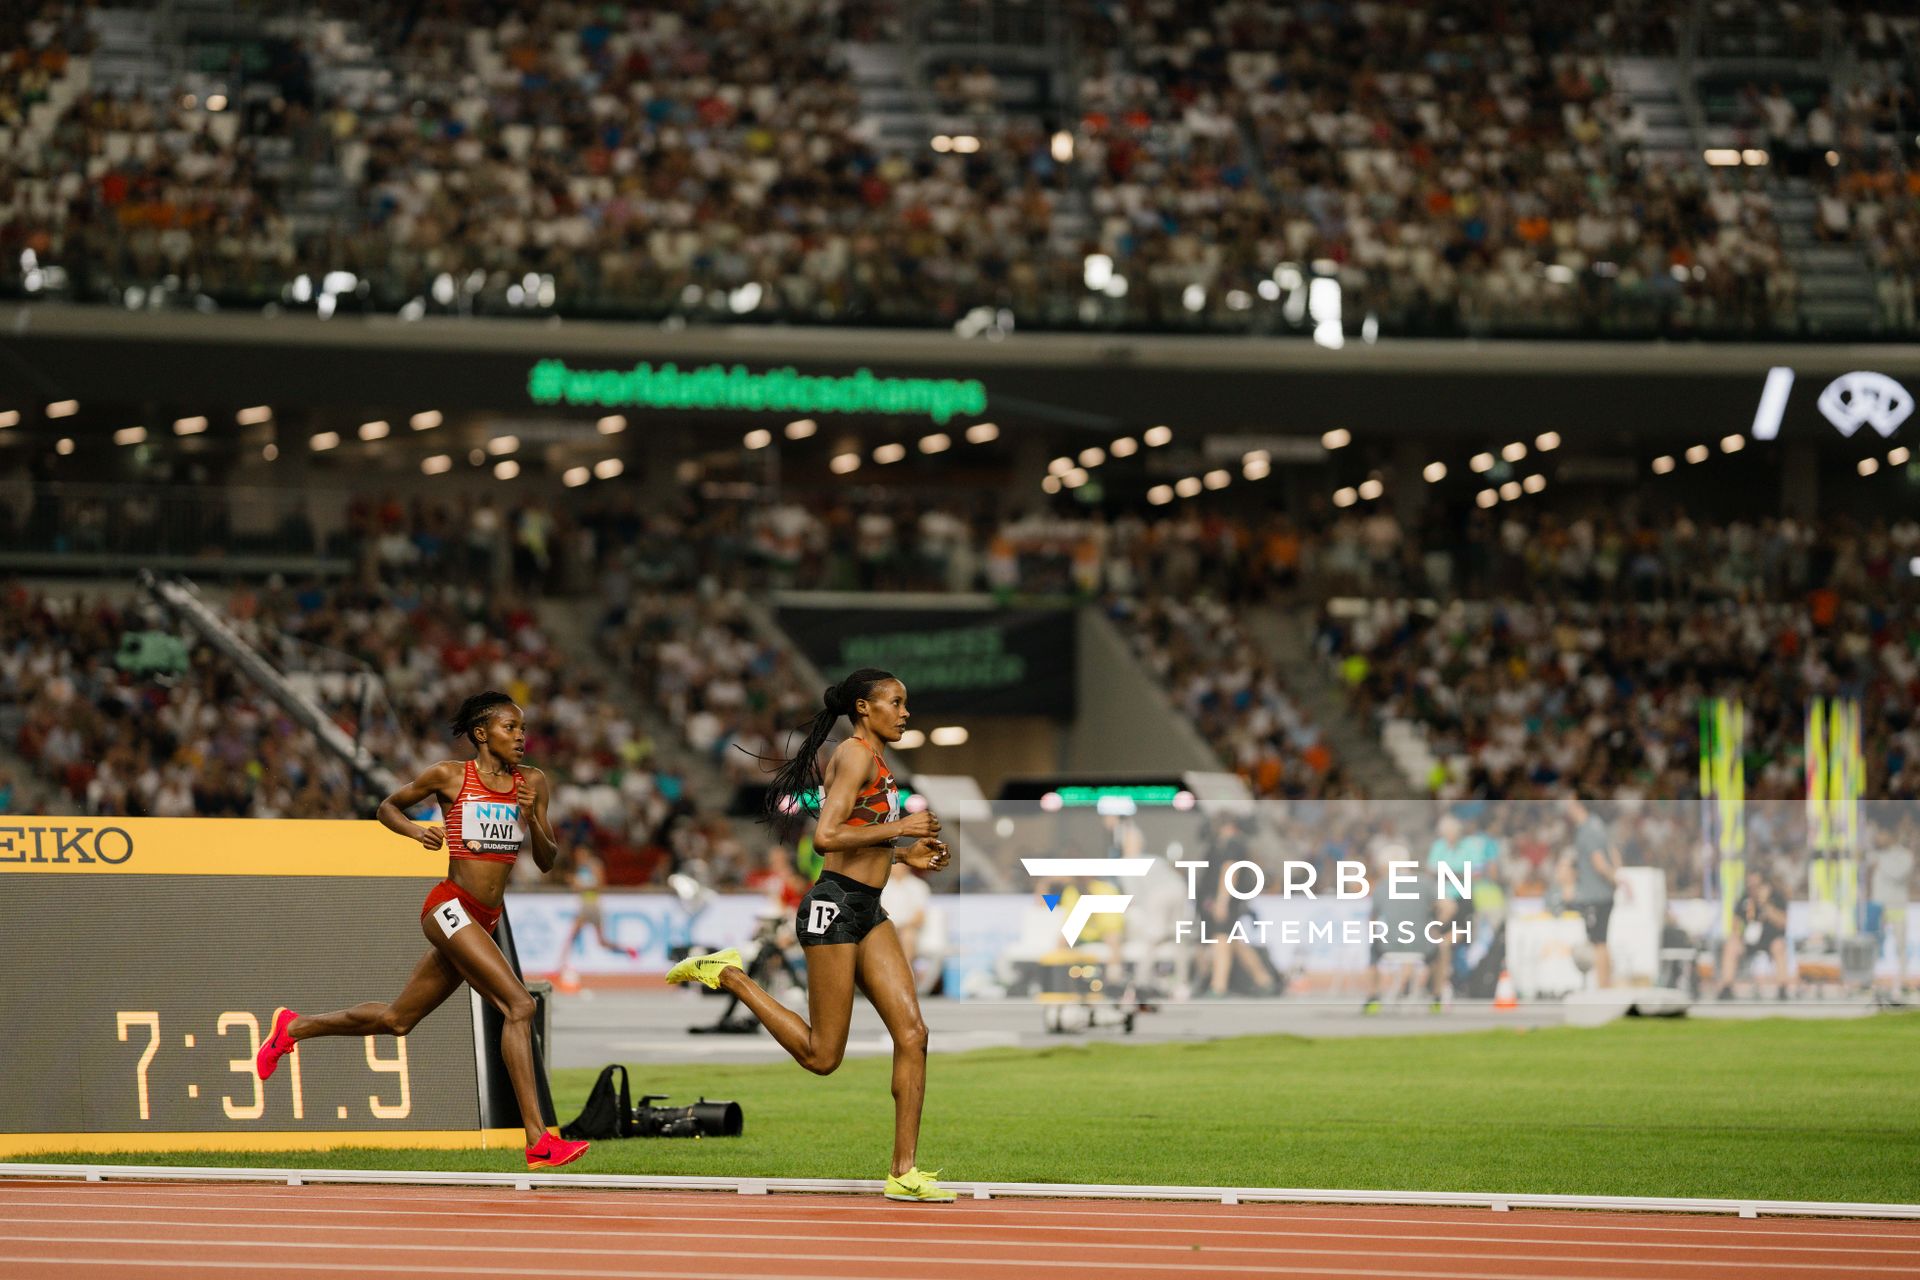 Winfred Mutile Yavi (BRN/Bahrain) during the 3000 Metres Steeplechase on Day 9 of the World Athletics Championships Budapest 23 at the National Athletics Centre in Budapest, Hungary on August 27, 2023.